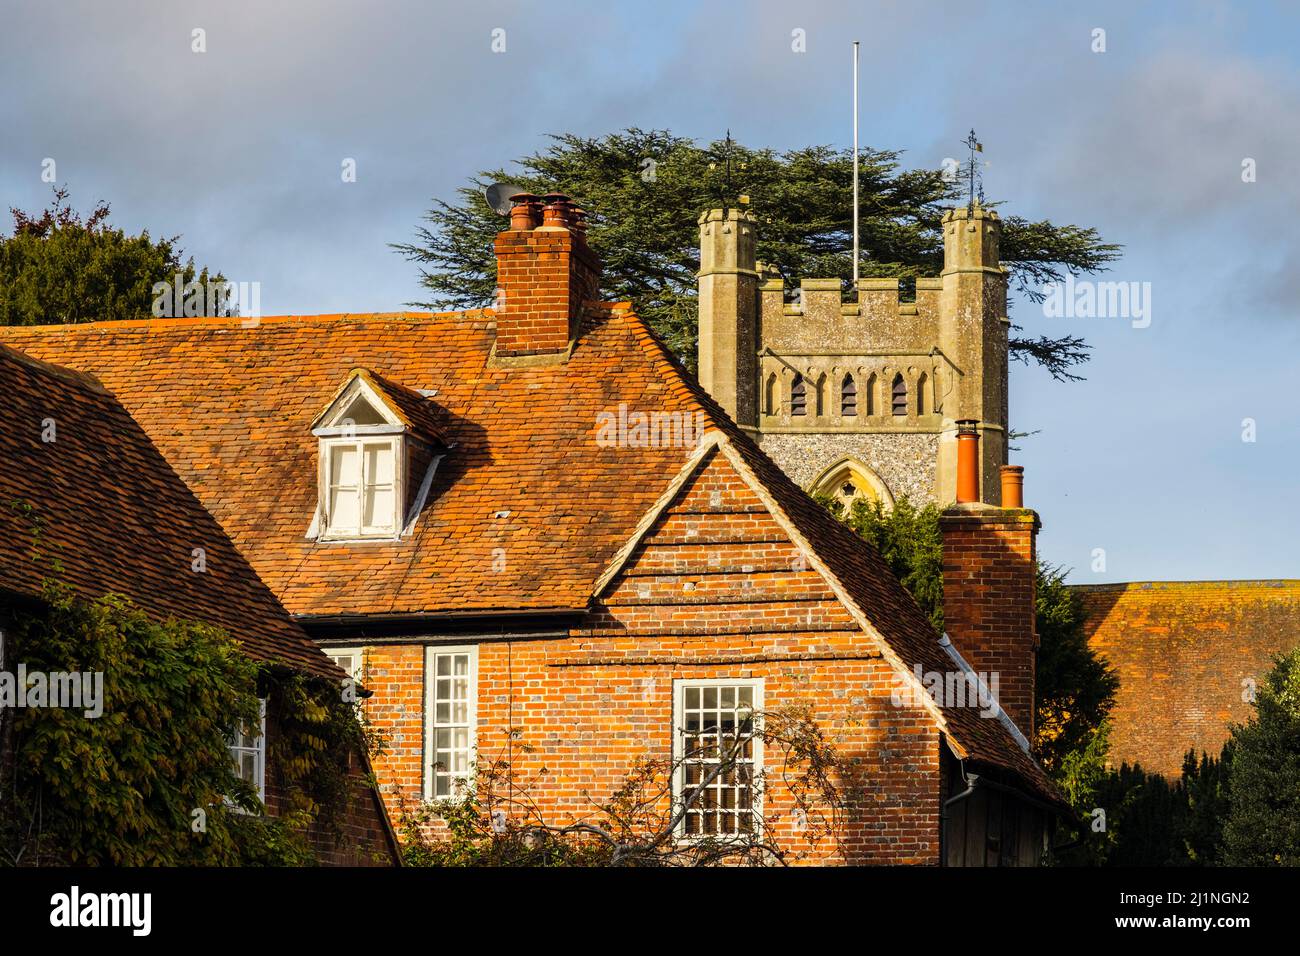 Period cottages and 14th century St Mary the Virgin church tower in historic rural Chilterns village. Hambleden, Buckinghamshire, England, UK, Britain Stock Photo